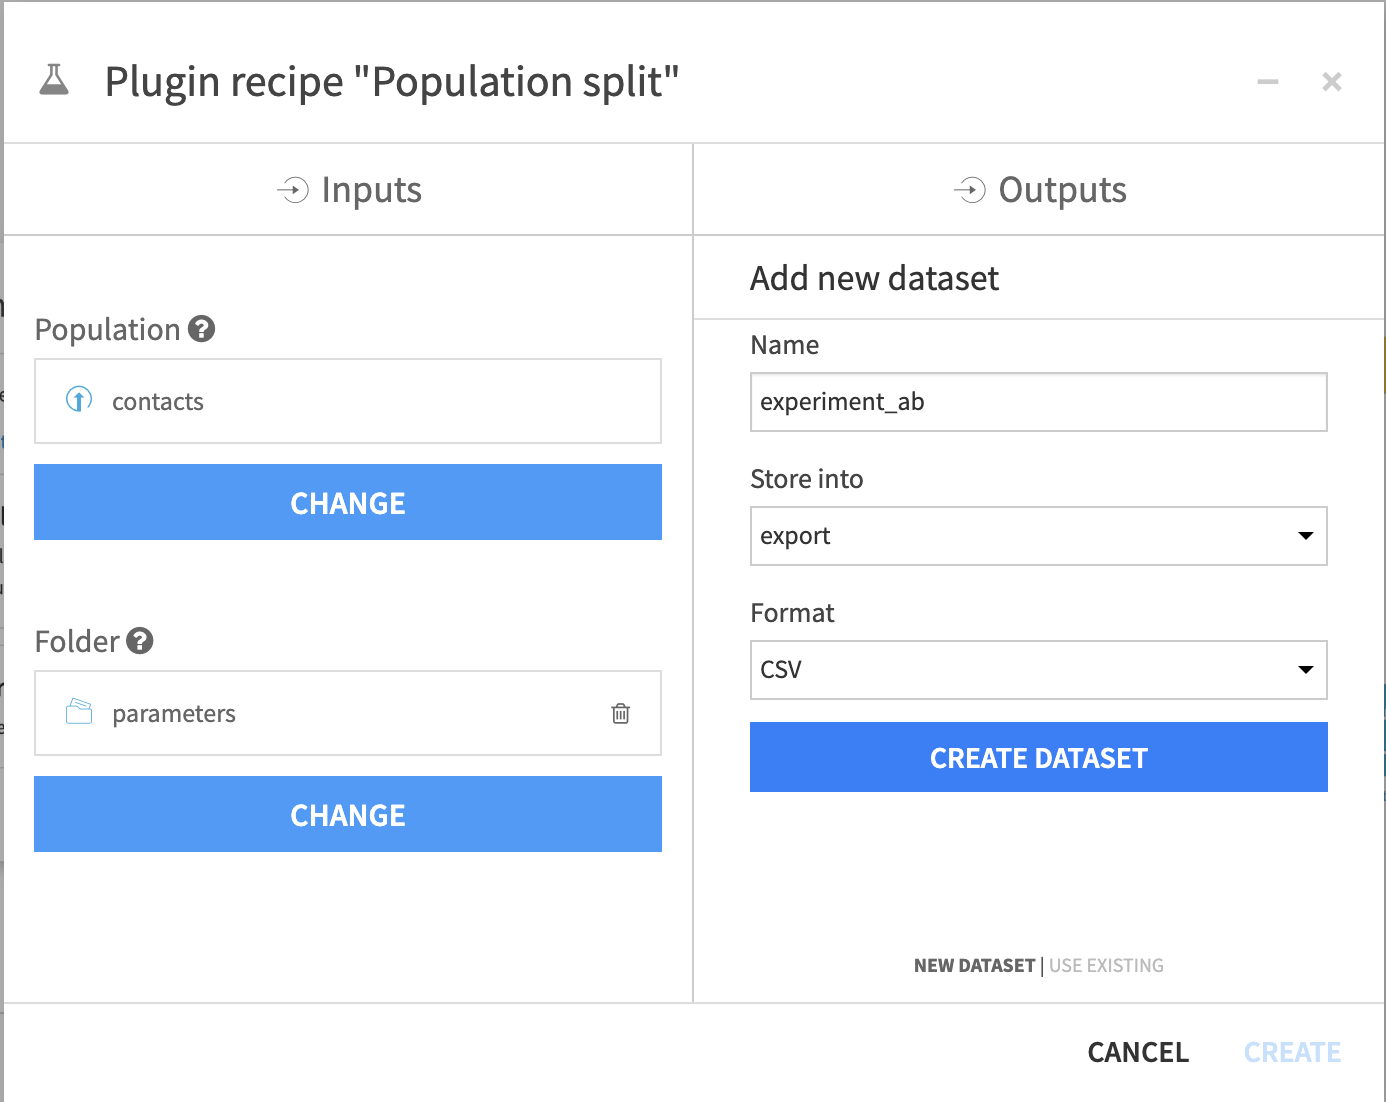 Set inputs and outputs for the Population Split recipe.